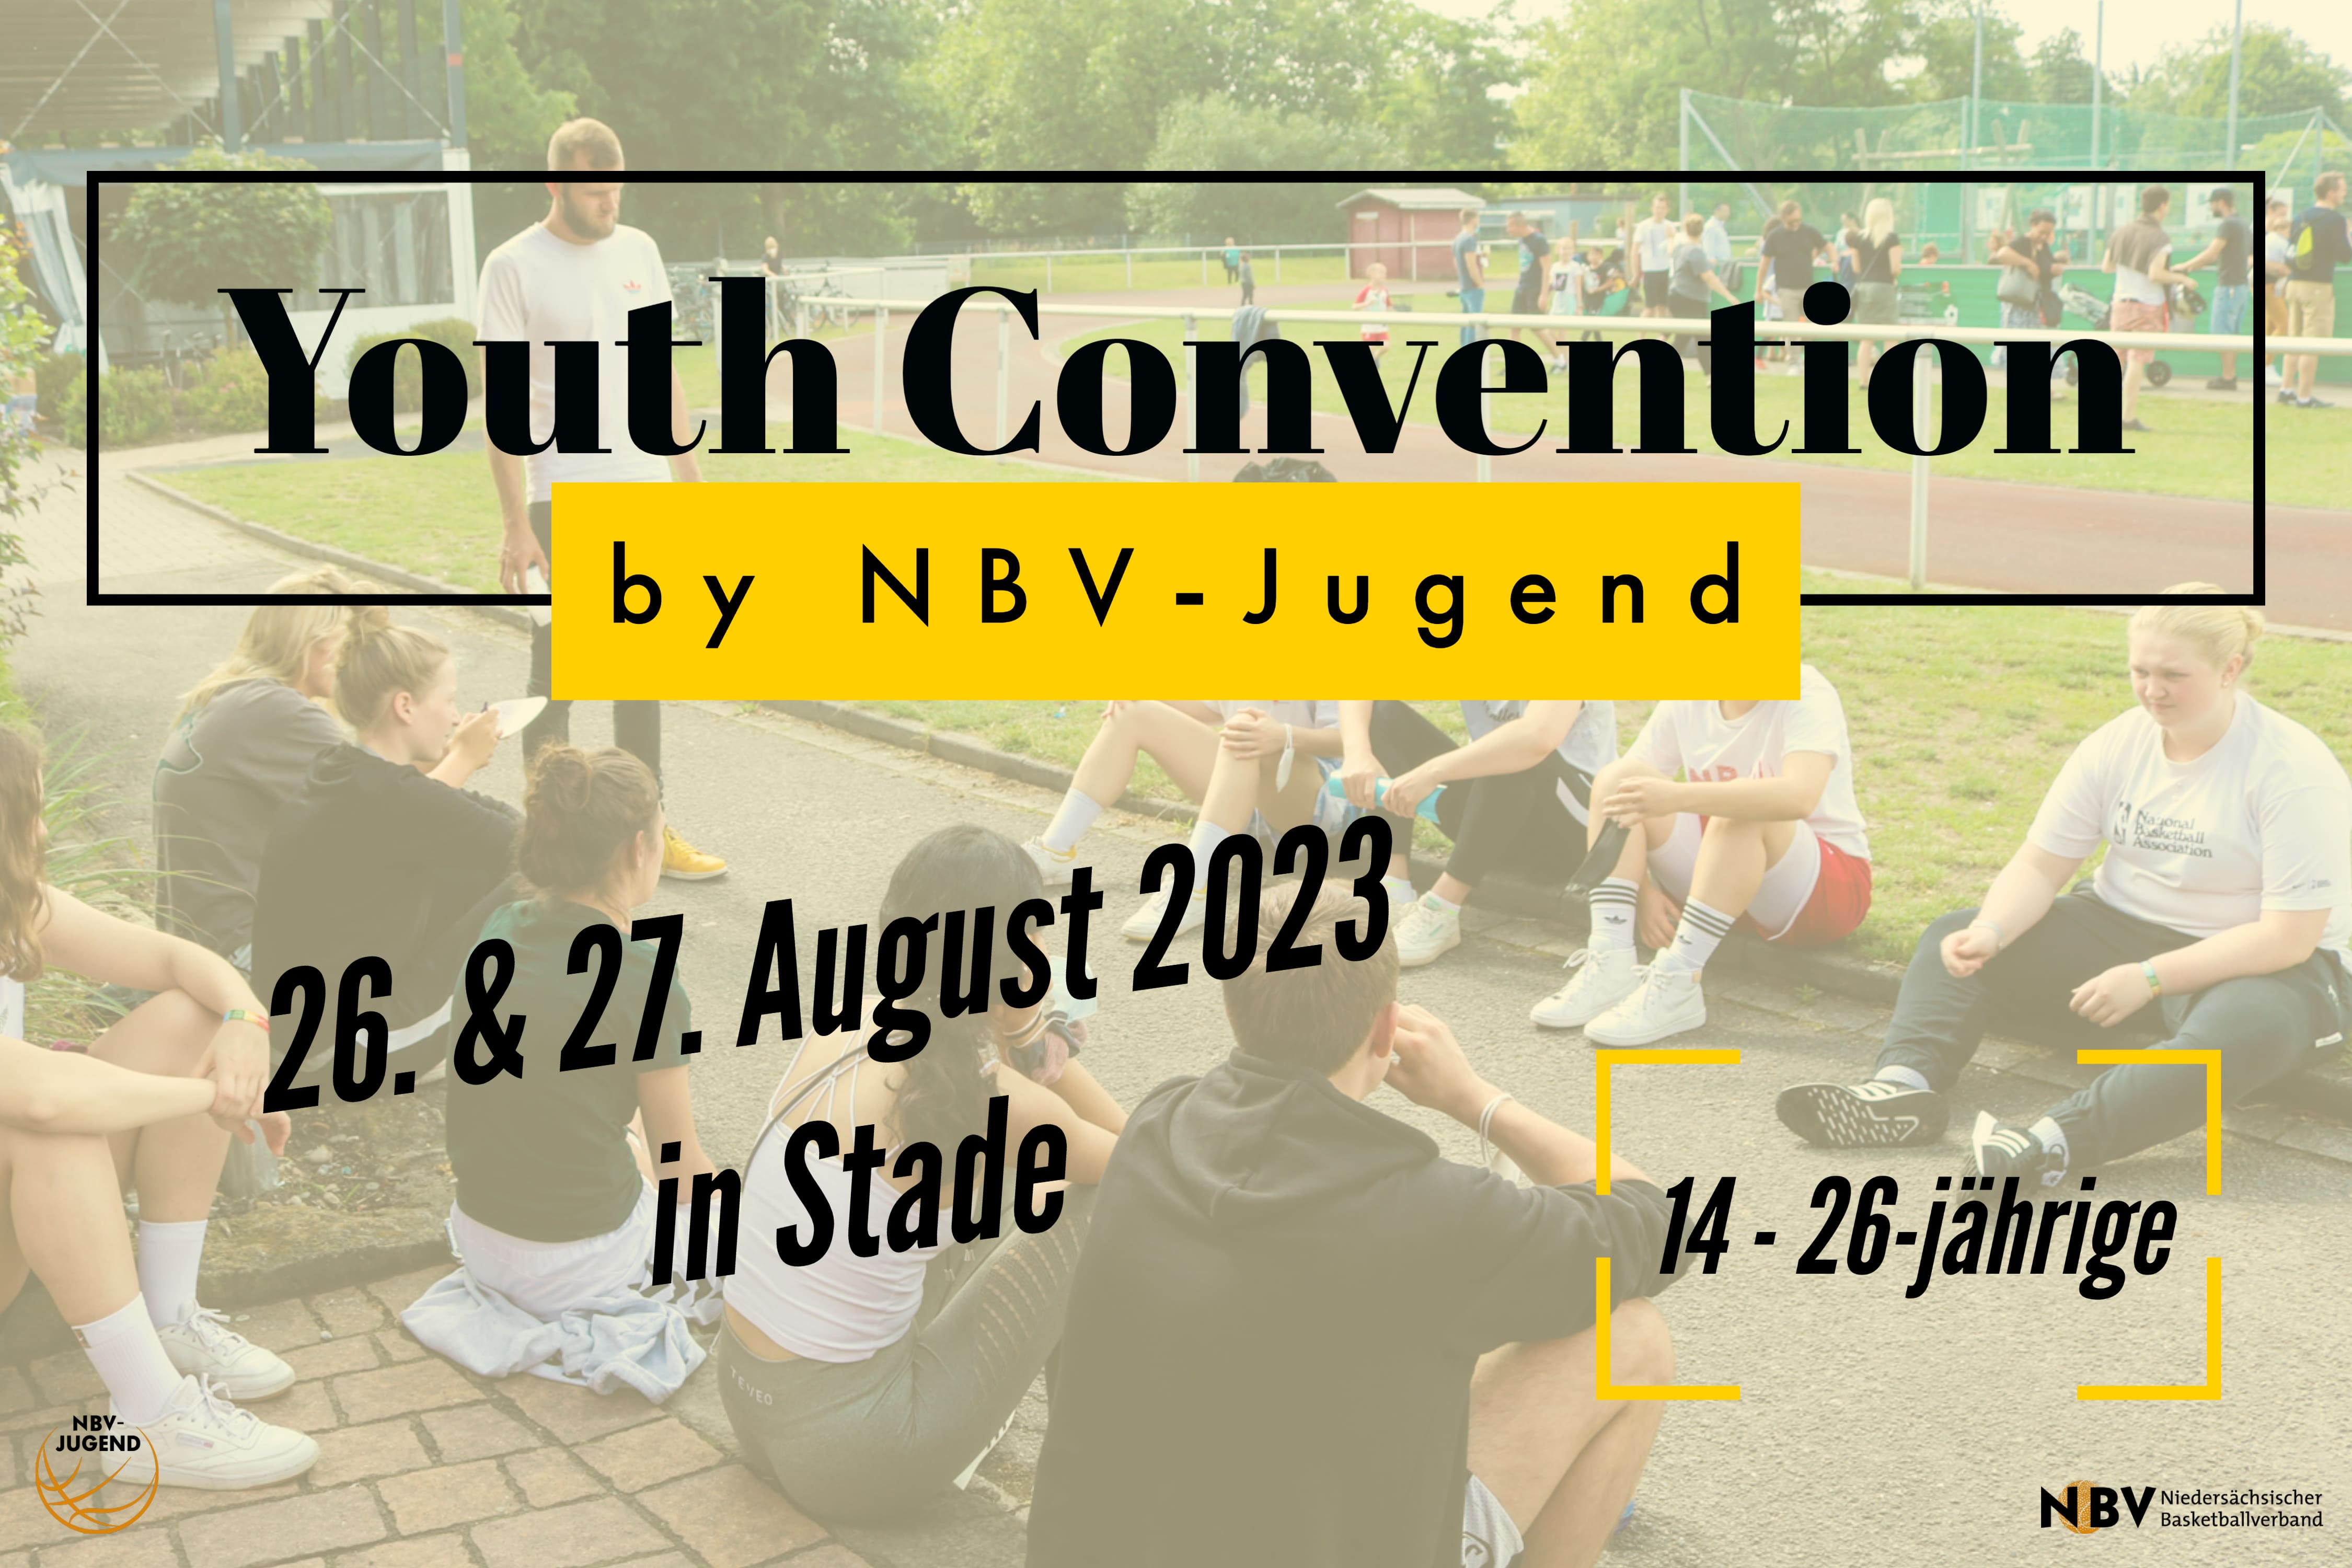 Youth Convention by NBV-Jugend 2023